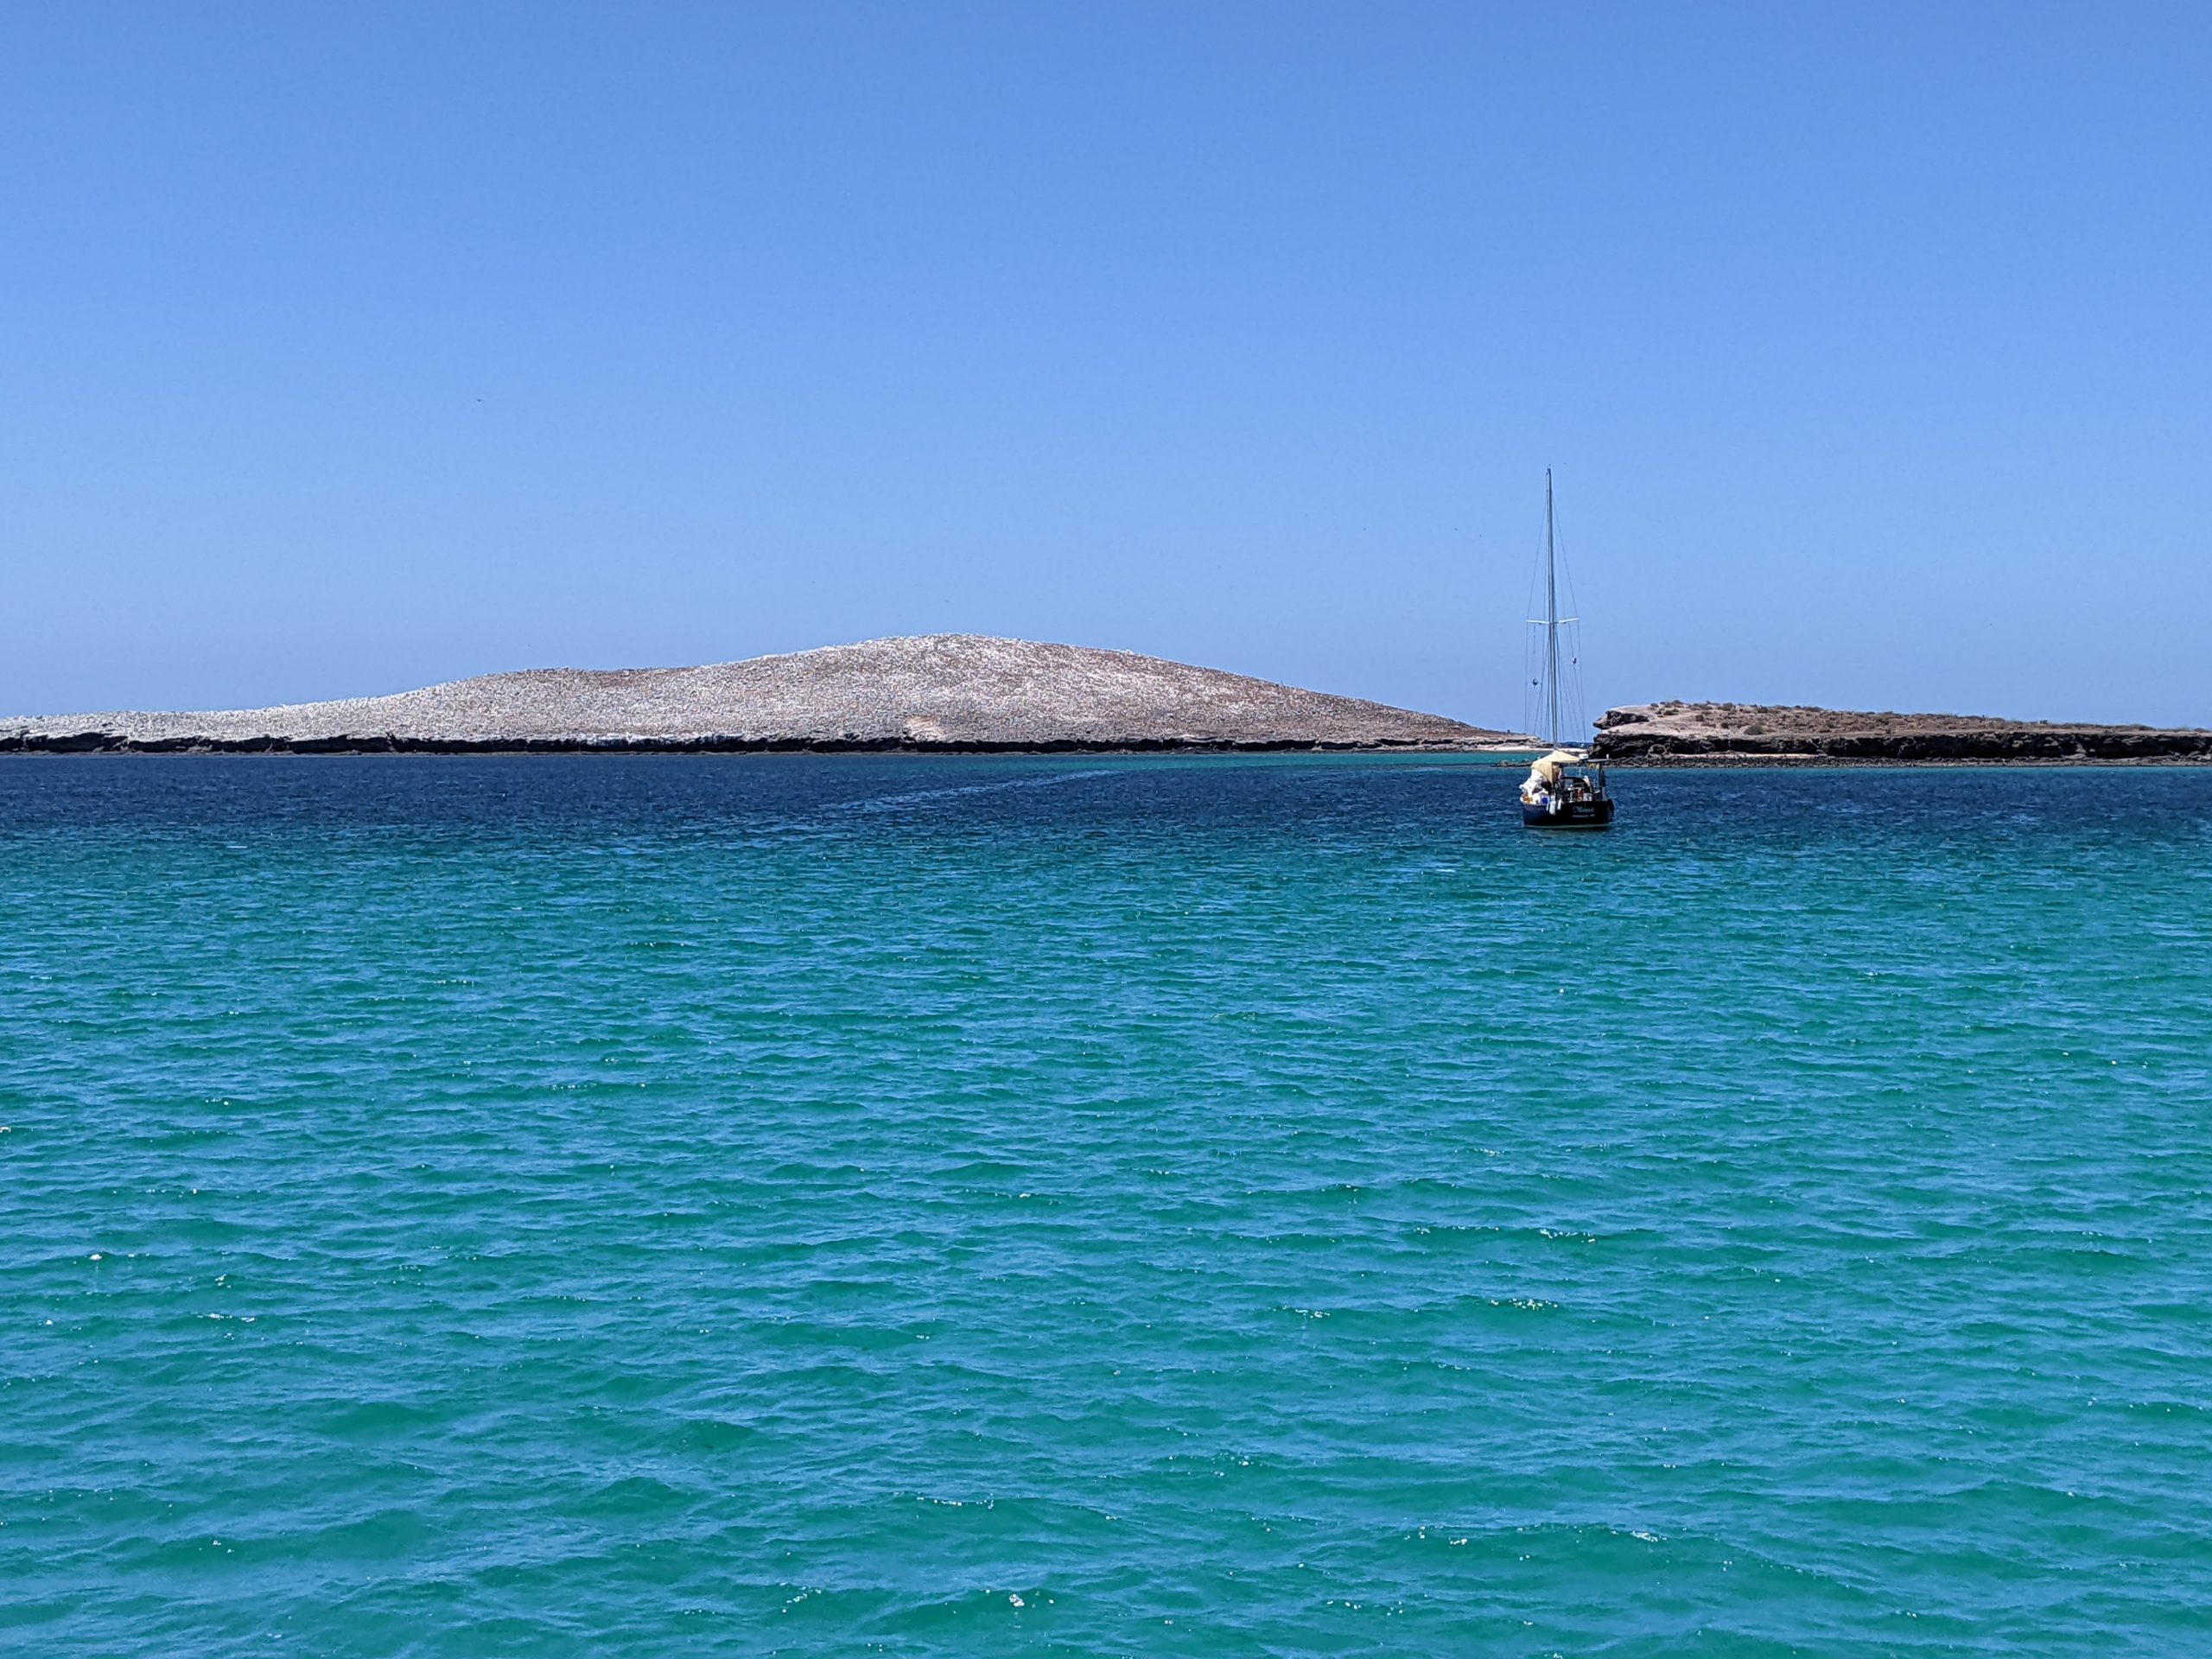 A boat drifts on a turquoise sea with land peeking up behind it